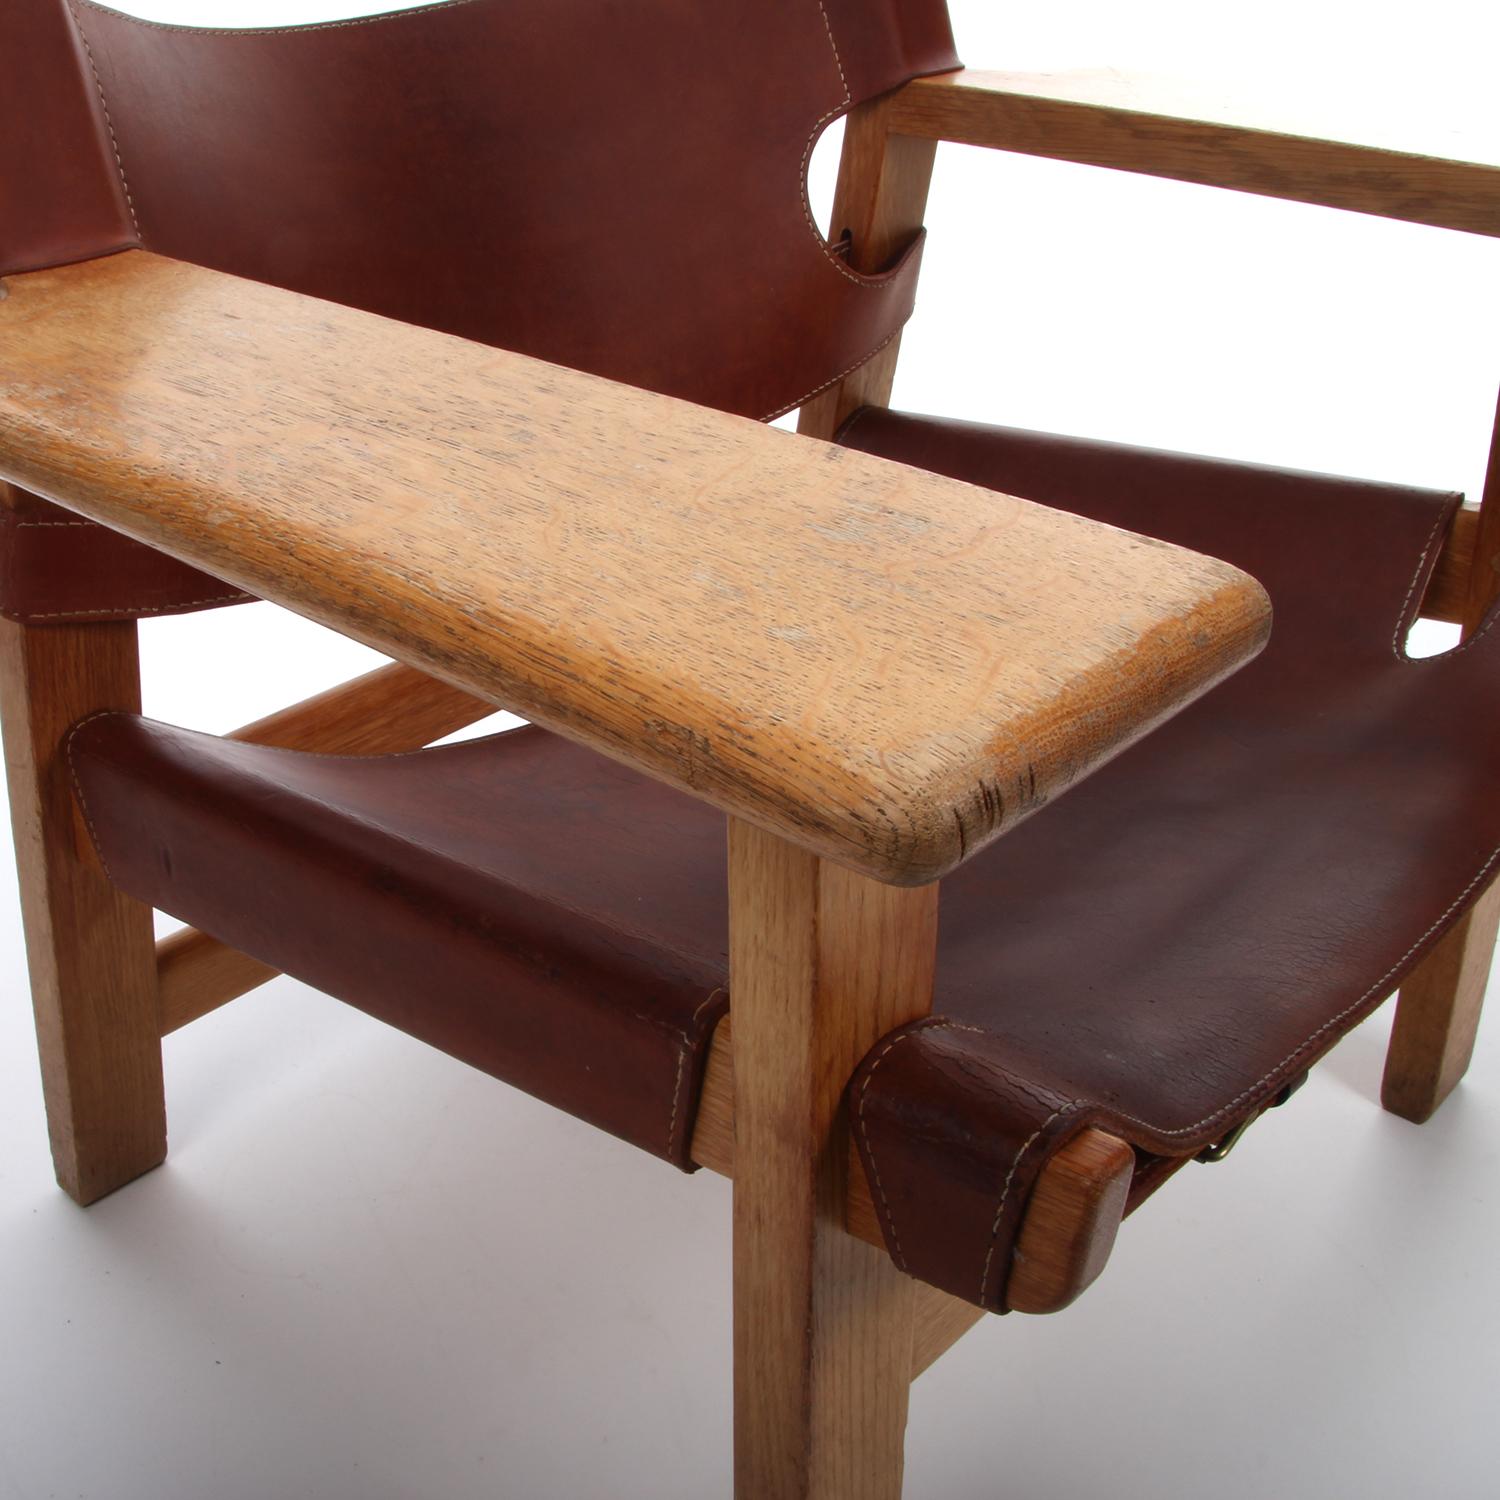 Leather Spanish Chair by Borge Mogensen, Fredericia Furniture, 1958, Vintage Edition